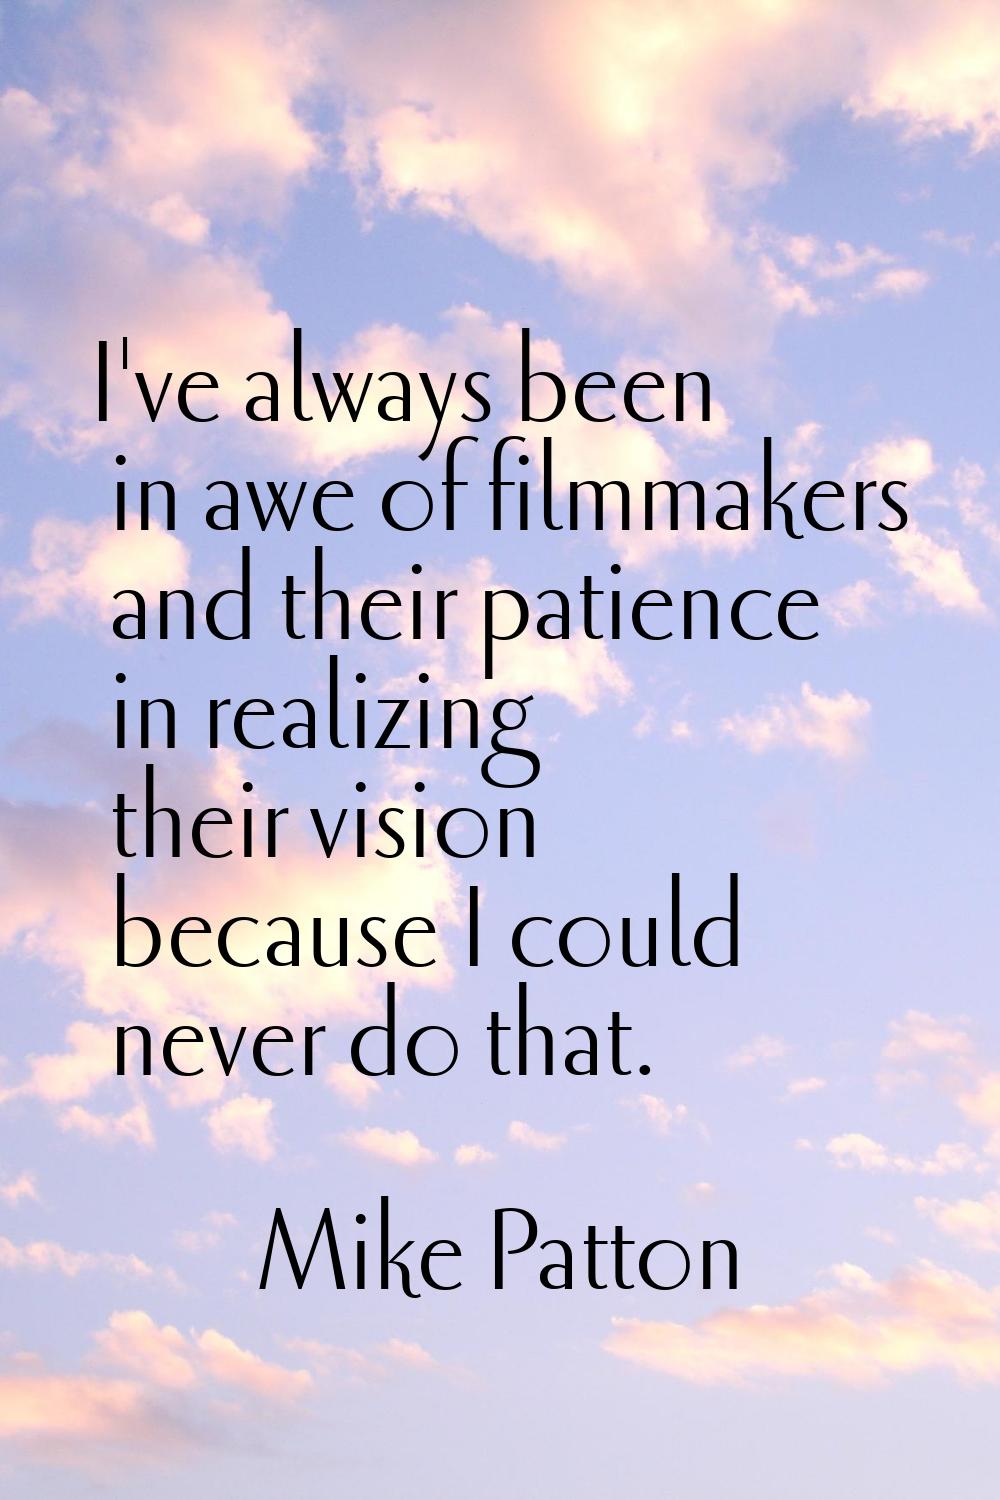 I've always been in awe of filmmakers and their patience in realizing their vision because I could 